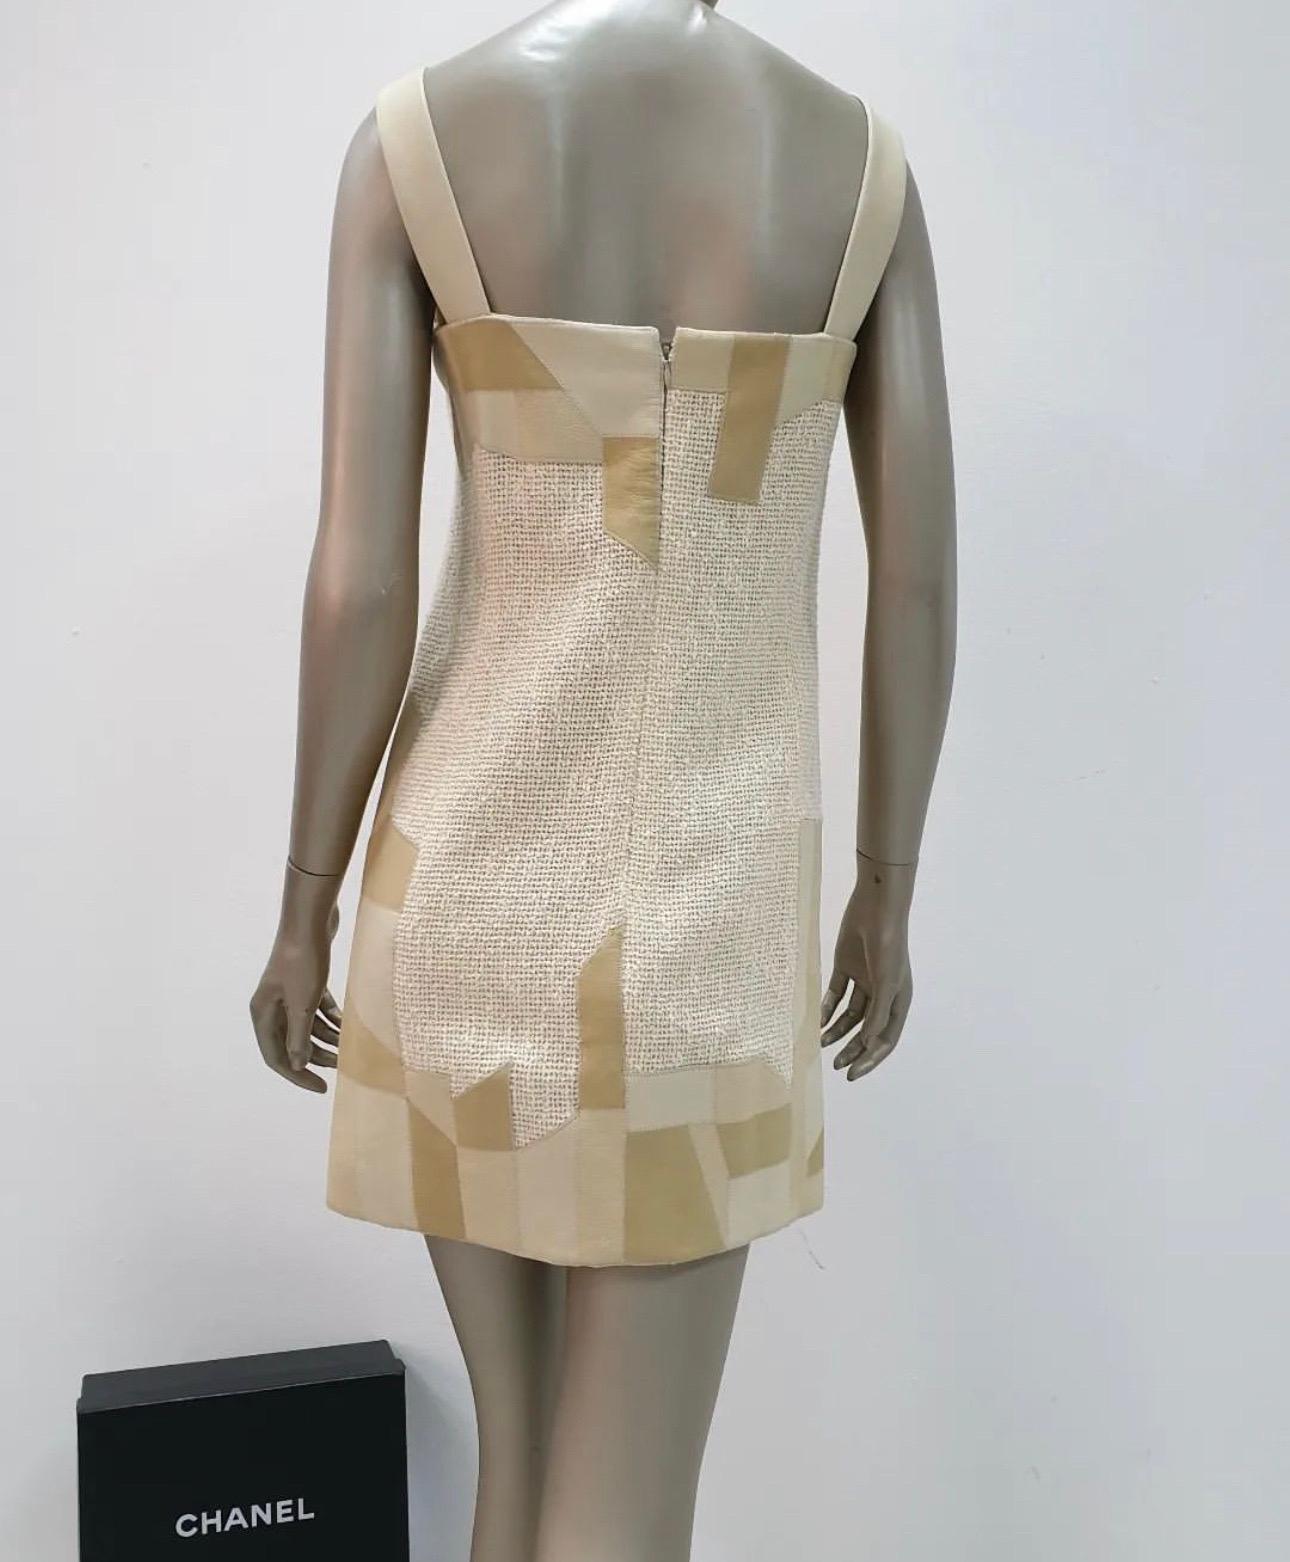 Chanel Spring 2010 Beige Tweed Leather Parts Dress In Excellent Condition For Sale In Krakow, PL